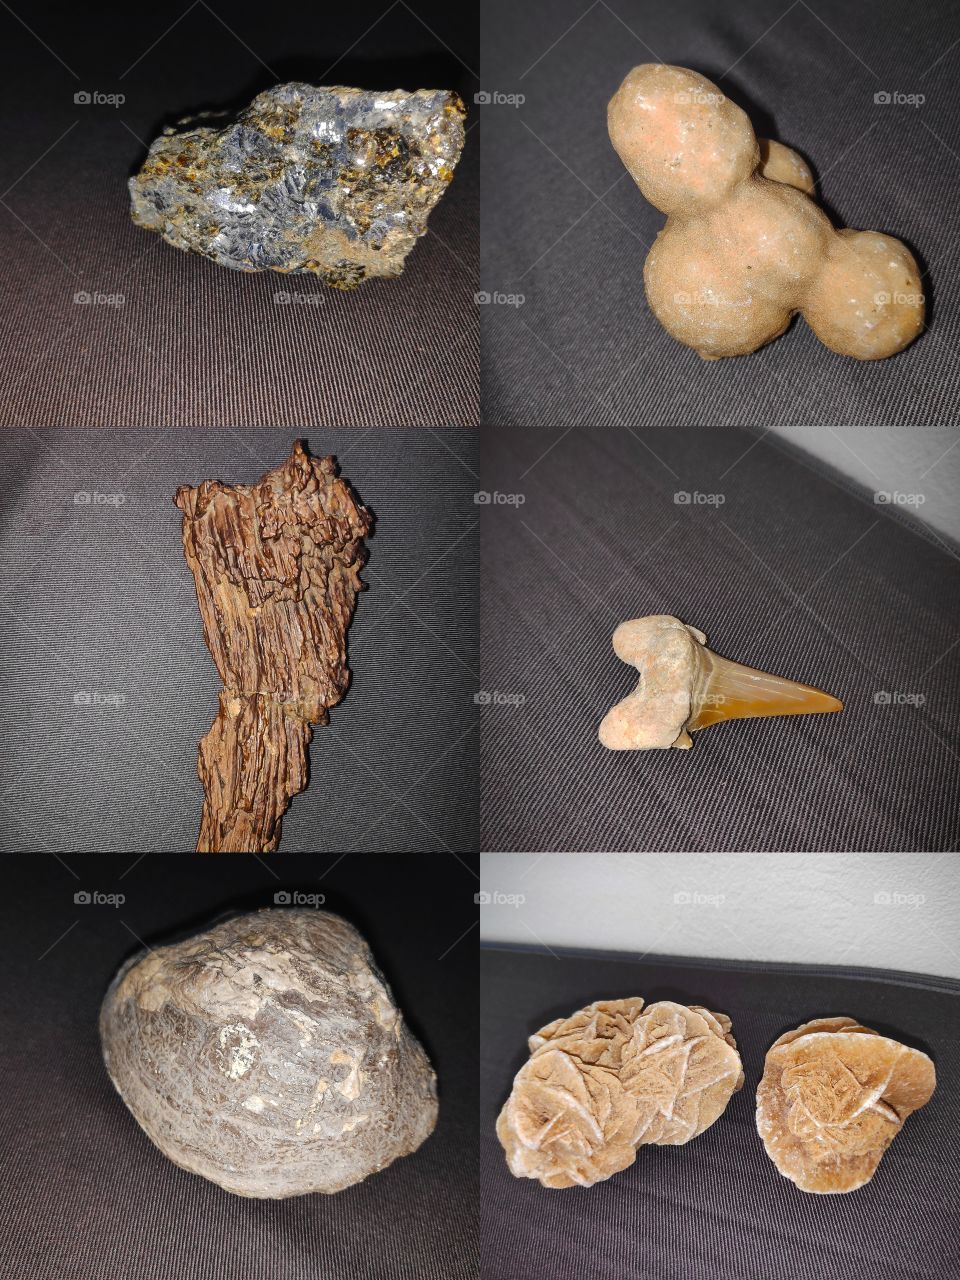 1: Meteorite 2: Fossil of excrement of camel 3:Fossil of wood 4:Fossil of a tooth of shark 5: Fossil of mold 6: desert Rose.
(All founded in Australia , but I had  do the photos one month later , when I was in Germany for expeditions).